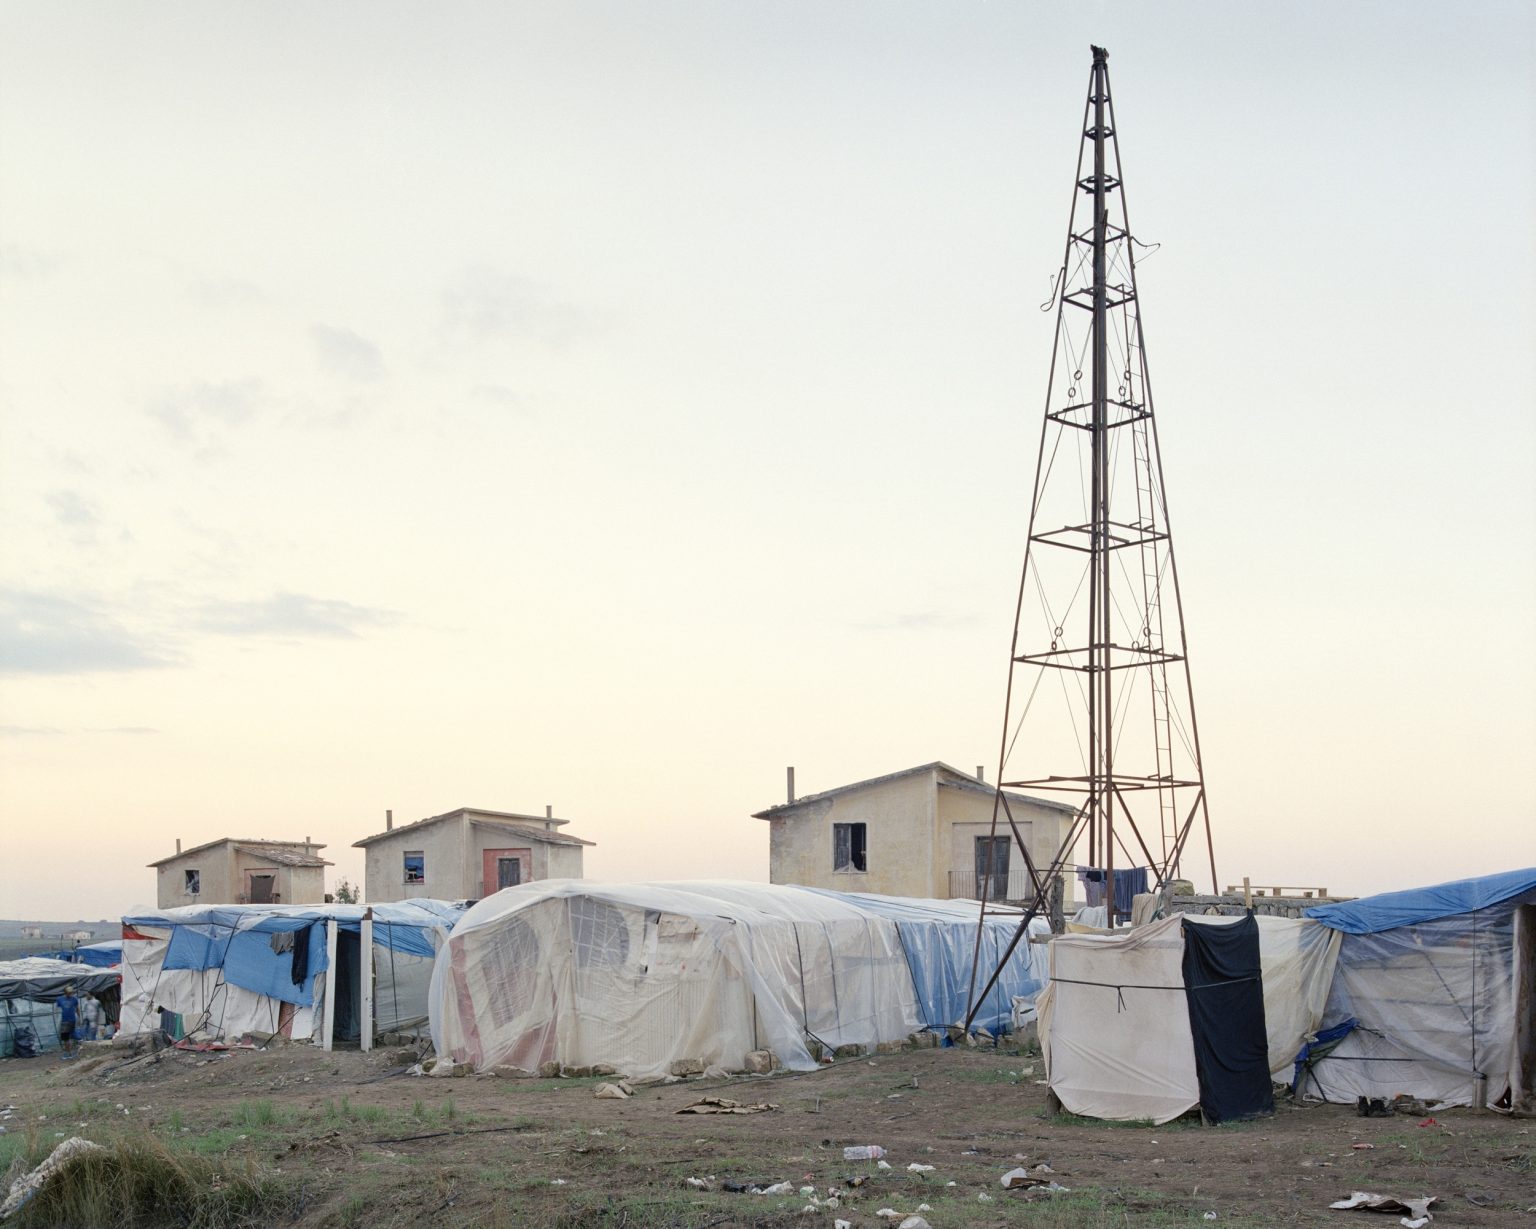 Palazzo San Gervasio (PZ), 2016. Ghetto of Mulini Matinelle, informal camp where about 500 daily laborers live during the season of the tomato harvesting in Basilicata. The ghetto was established by the occupation of some houses of the agrarian reform and soon expanded with temporary shacks without toilets, electricity and running water. ><

Palazzo San Gervasio (PZ), 2016. Ghetto di Mulini Matinelle, campo temporaneo dove vivono circa 500 lavoratori Africani durante la stagione della raccolta dei pomodori in Basilicata. Il ghetto nasce dalloccupazione di alcune case della riforma agraria e in breve tempo si è espanso con baracche temporanee senza servizi igienici, elettricità e acqua corrente.